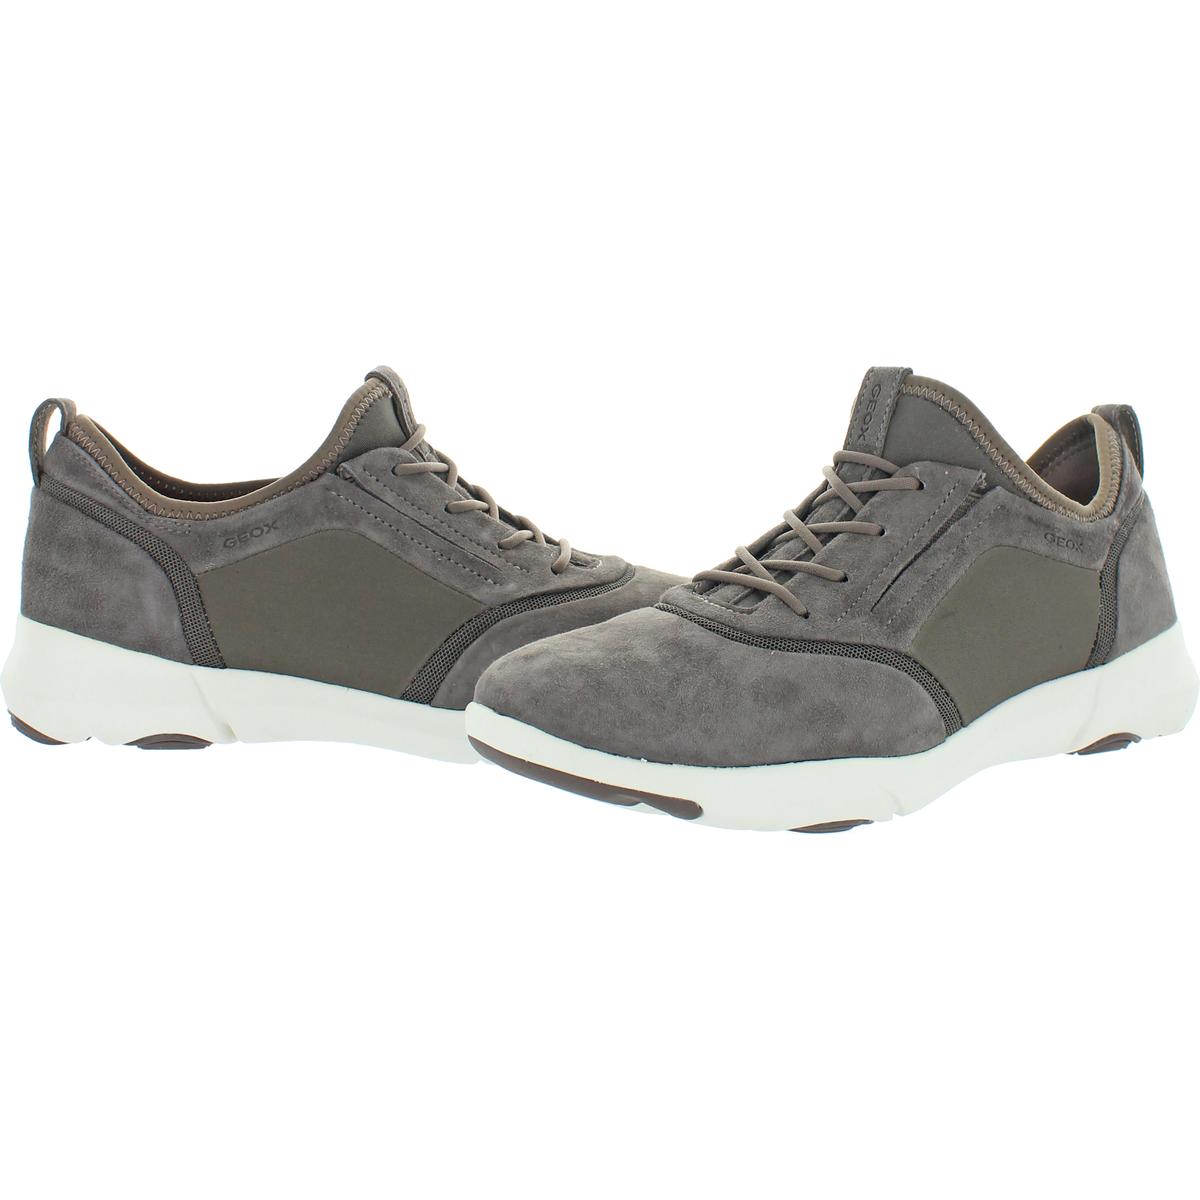 Geox Respira Womens Nebula Trainers Breathable Sneakers Shoes BHFO 3378 ...